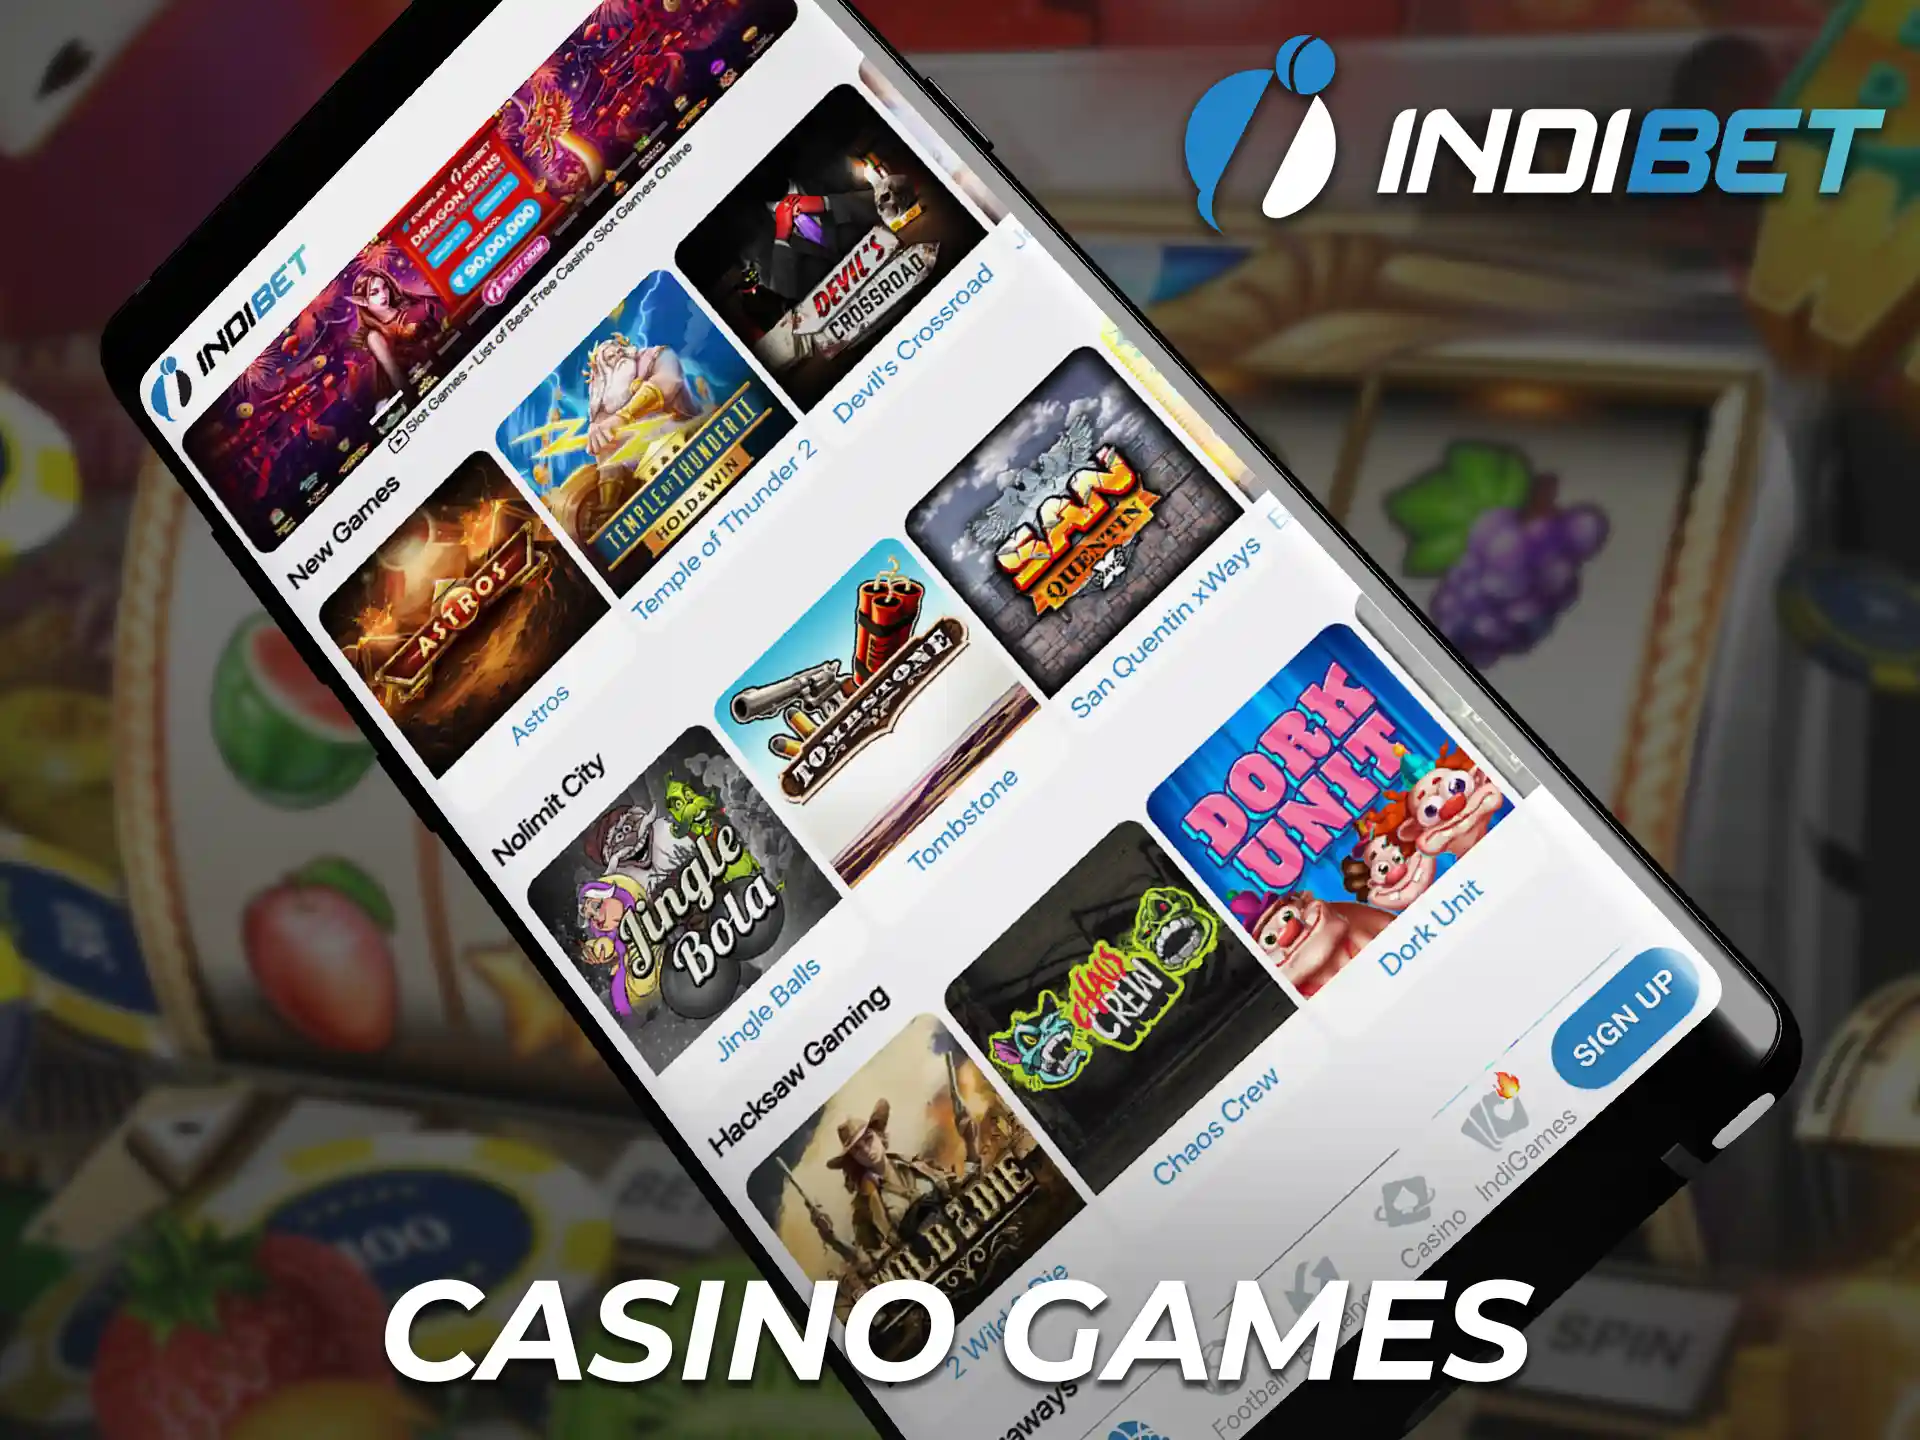 In the Indibet app you will find more than 2,000 games from various categories.